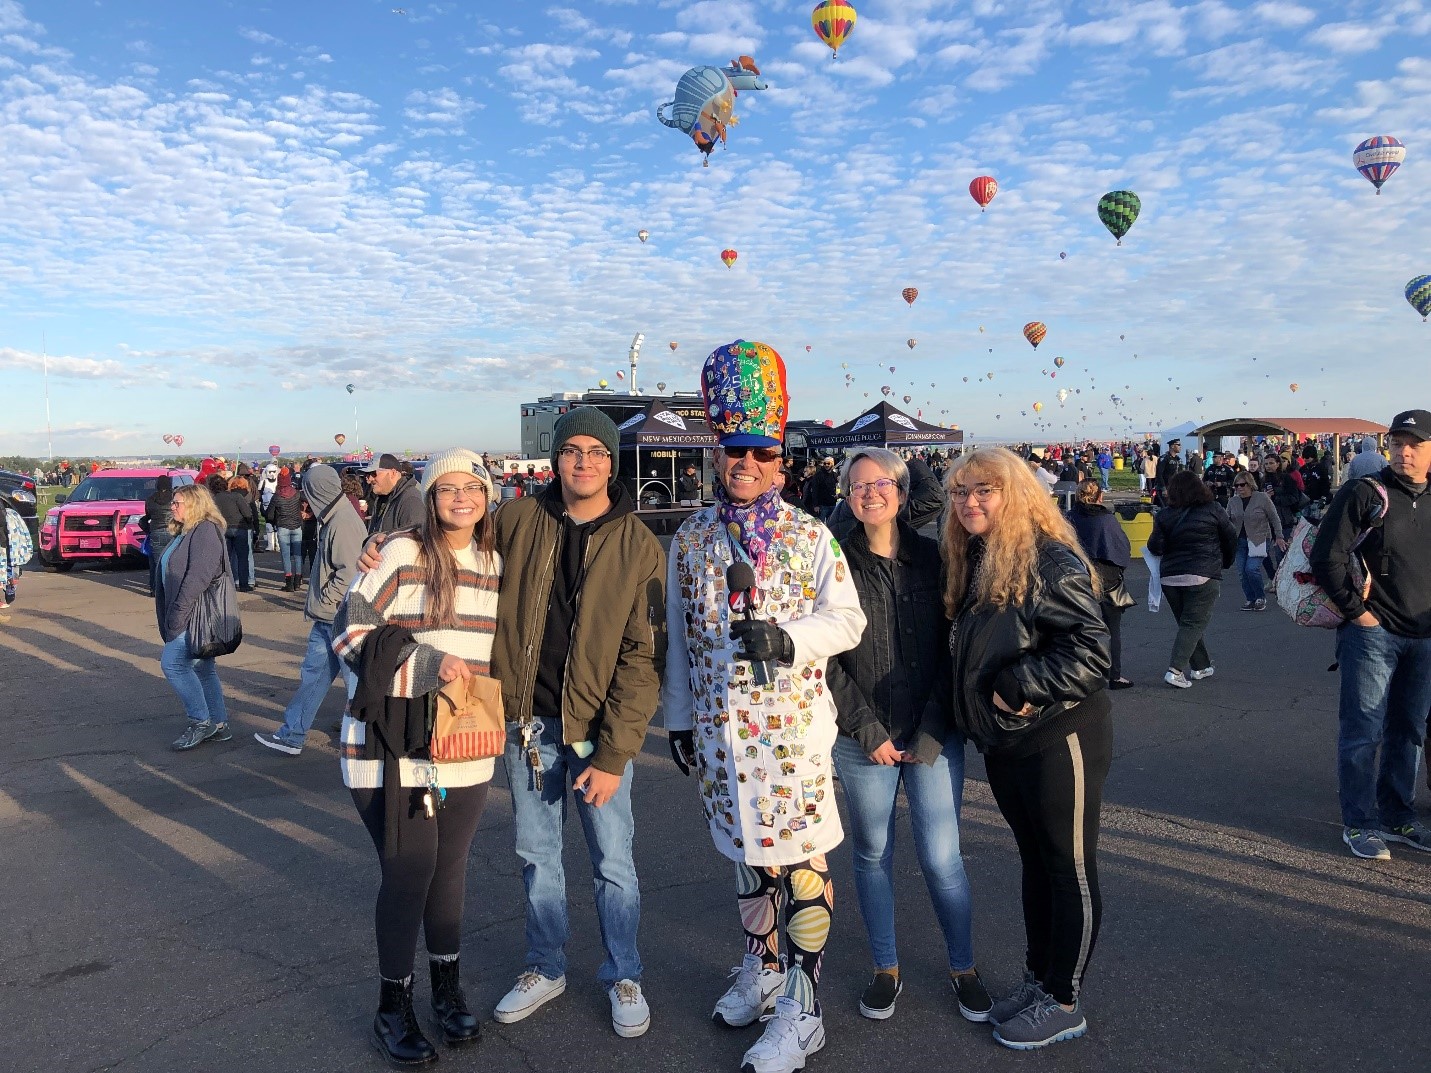 5 people stand smiling at the camera. They are outdoors with a blue sky filled with many hot air balloons. Arlin Arpero stands to the left, wearing a sweater and a hat, next to a man in a hoodie and hat. In the center, a man wears a bright rainbow cap and a white coat covered in colorful pins. Two women stand to the right in the image, wearing black jackets.